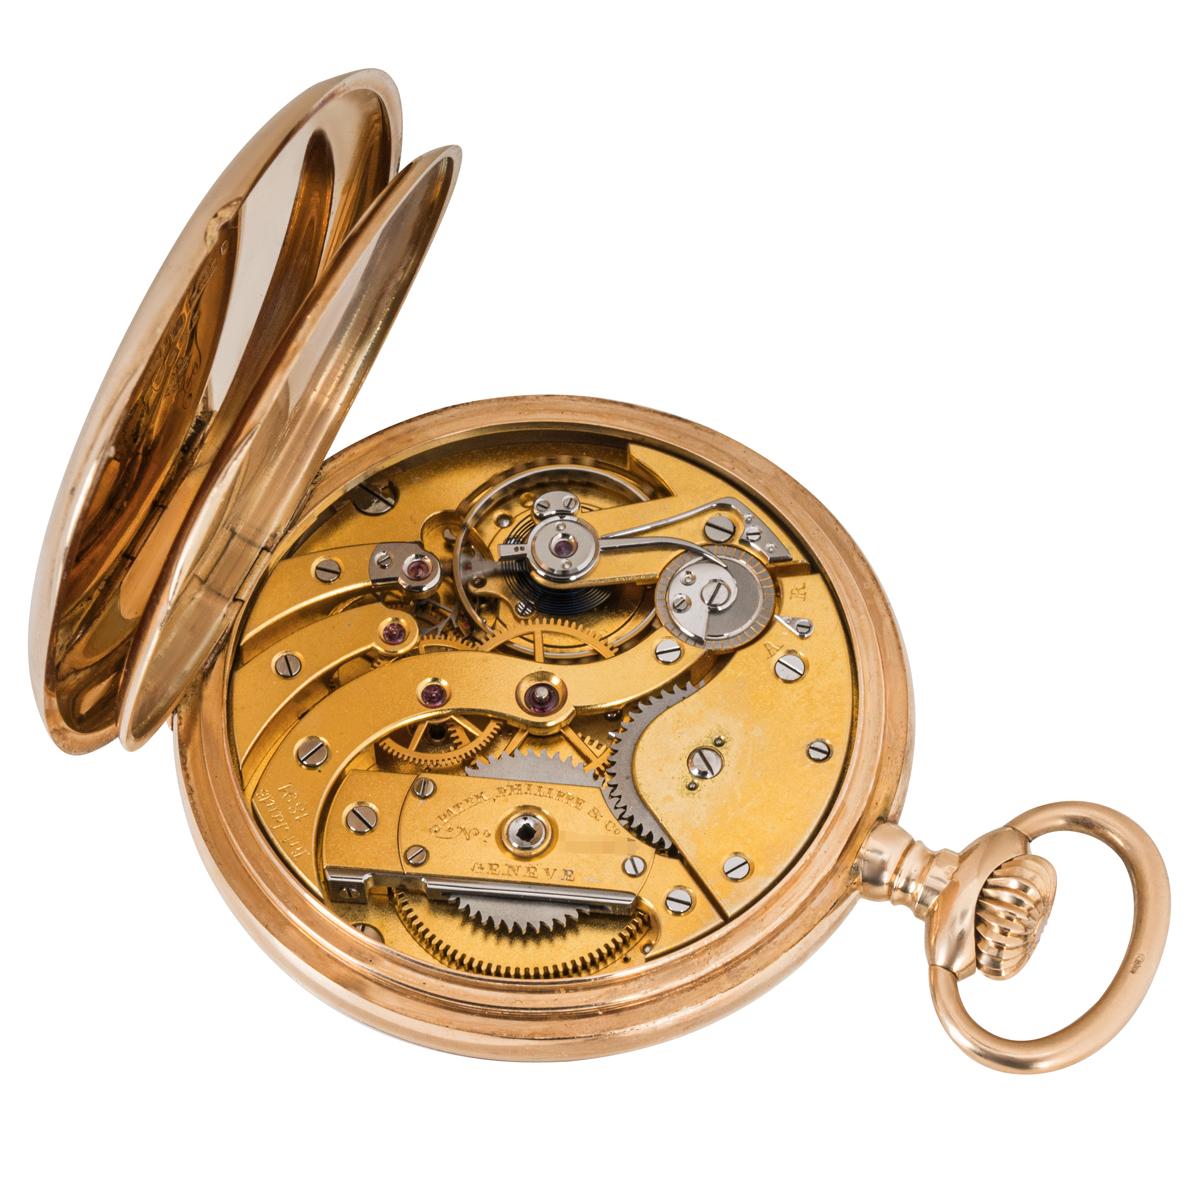 Patek Philippe. A Rare 14CT Rose Gold Keyless Lever Open Face Pocket Watch C1911 2